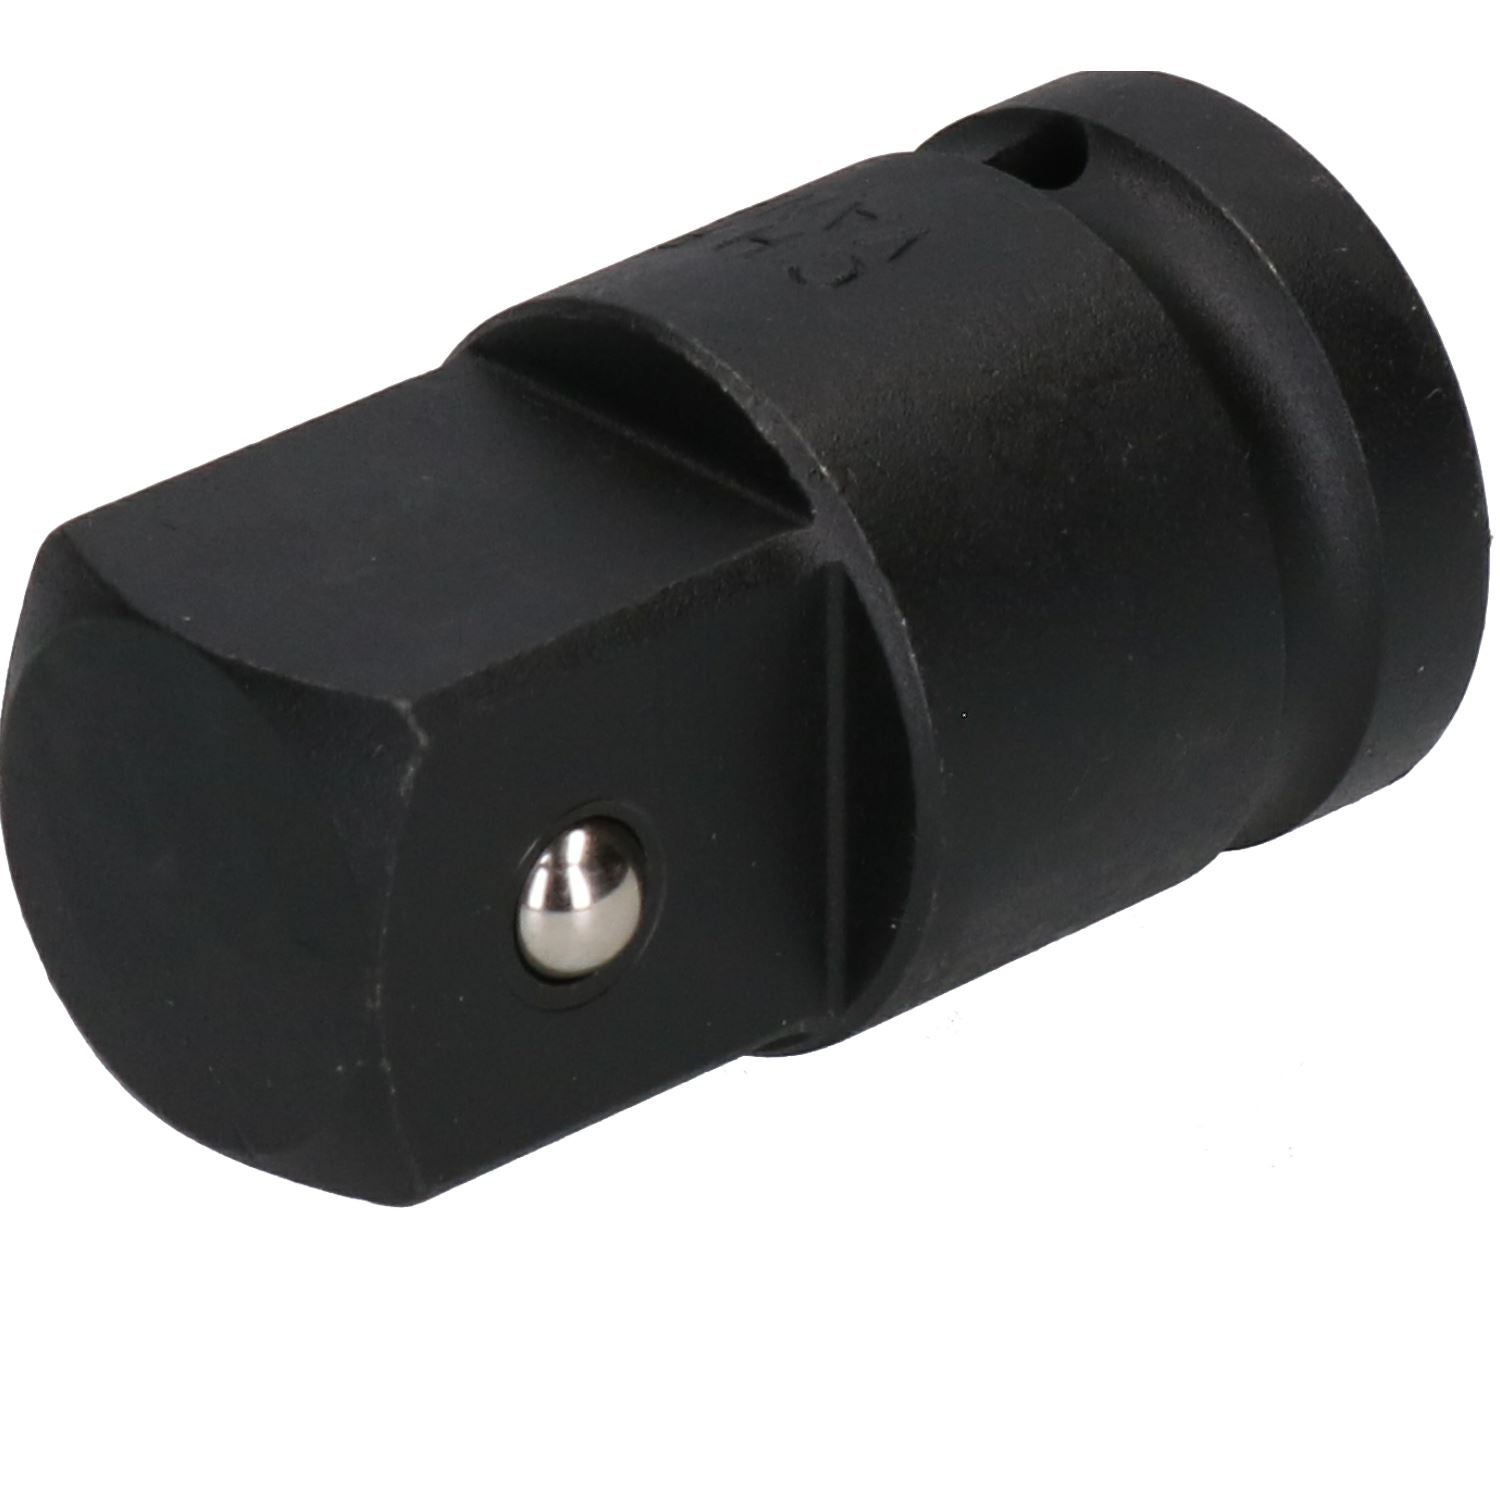 35mm Metric 3/4" or 1" Drive Deep Impact Socket 6 Sided With Step Up Adapter